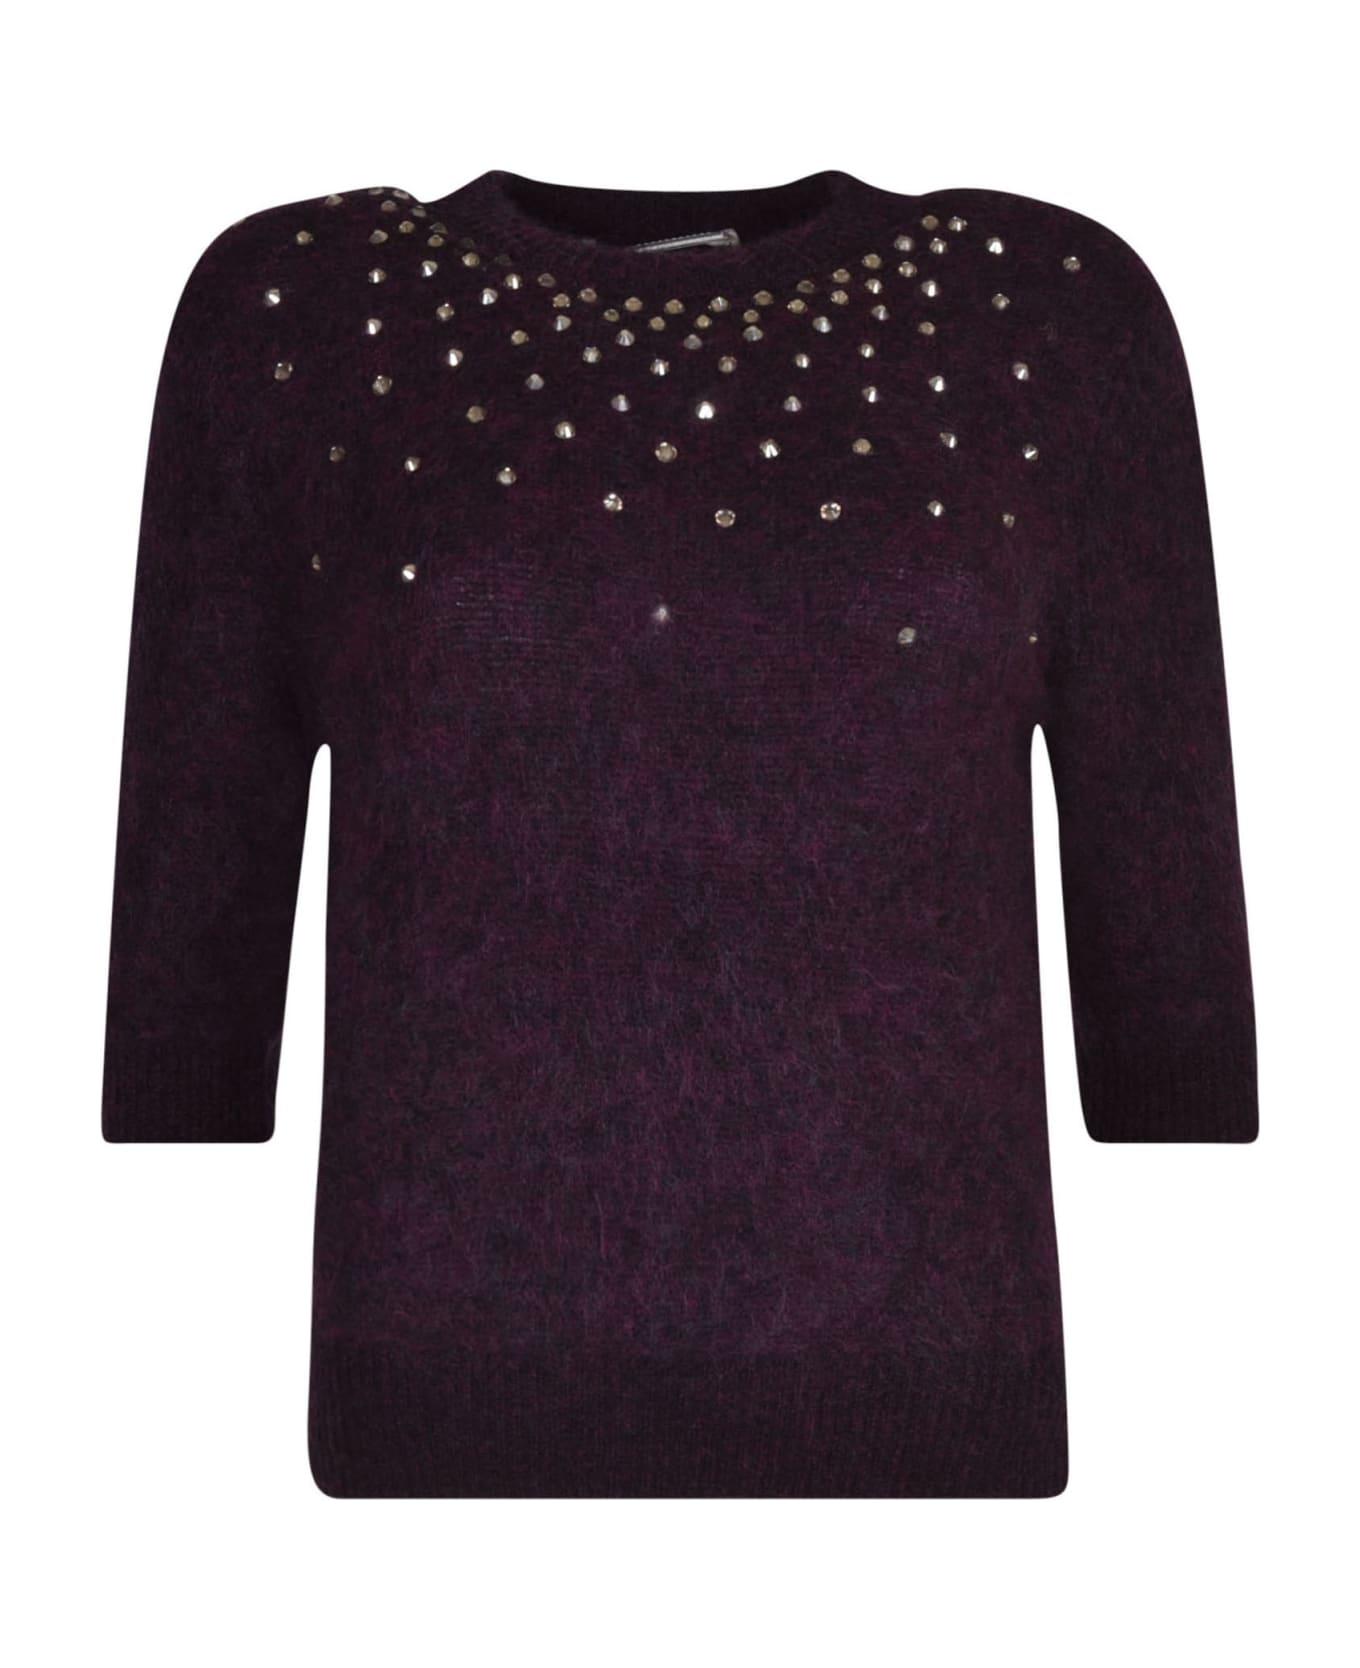 Alessandra Rich Crystals Embellishment Sweater - Violet 